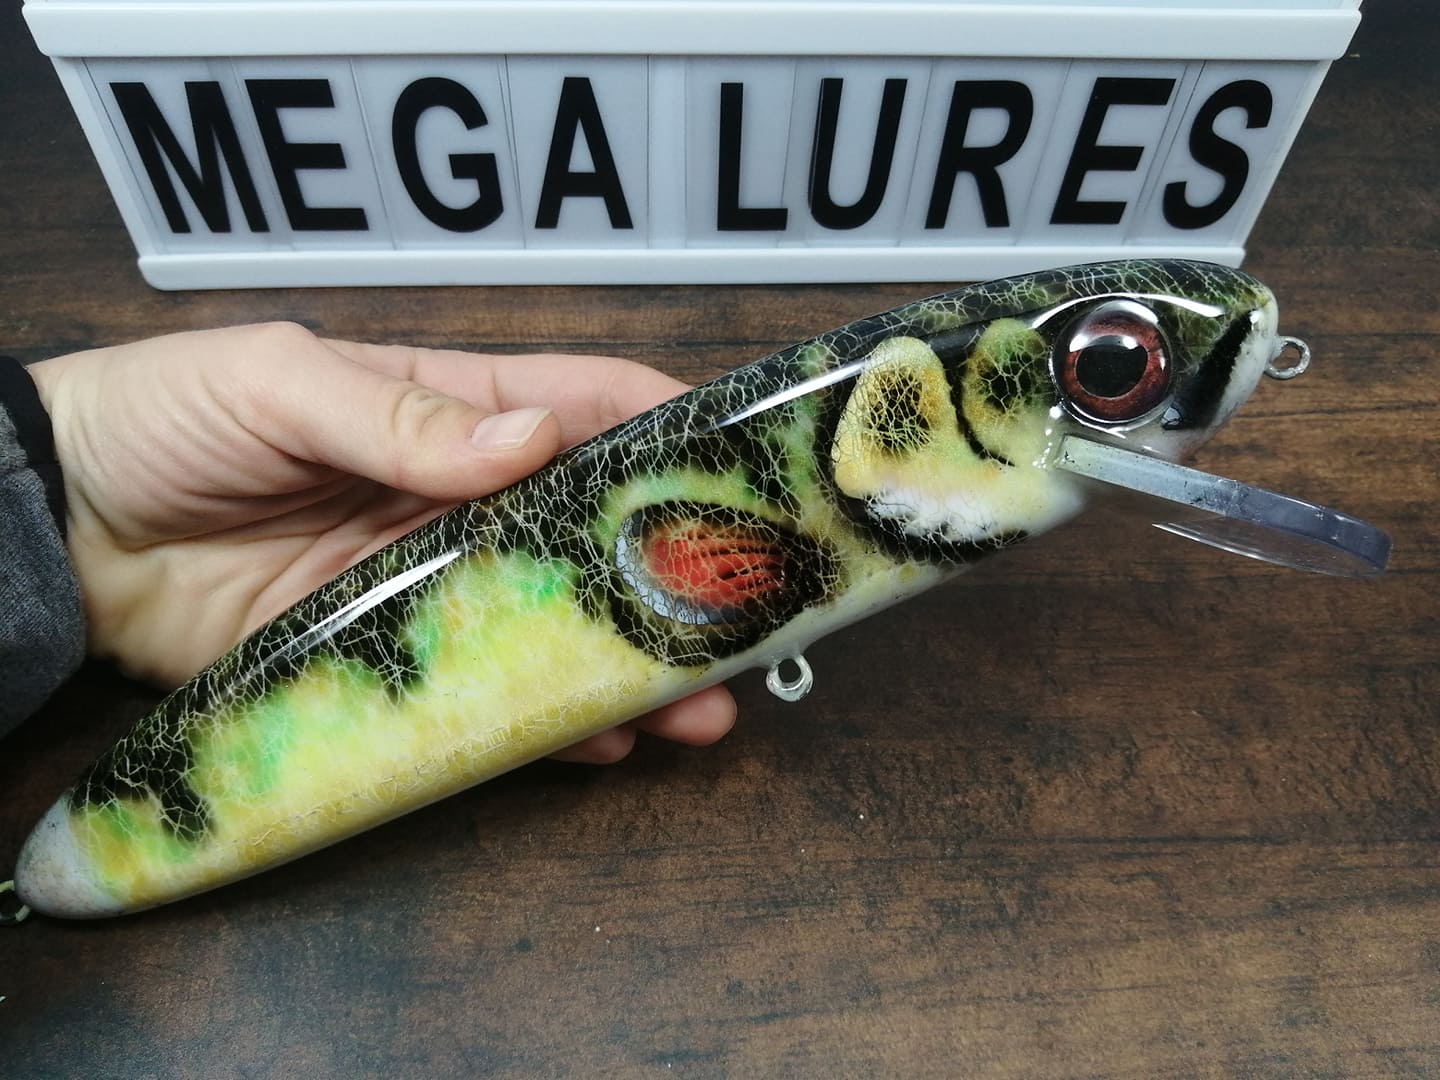 https://www.megaluresml.com/wp-content/uploads/2020/12/GS10-Perch-Mega-Lures-Polycarbonate-Custom-Lures-Musky-Fishing.jpg